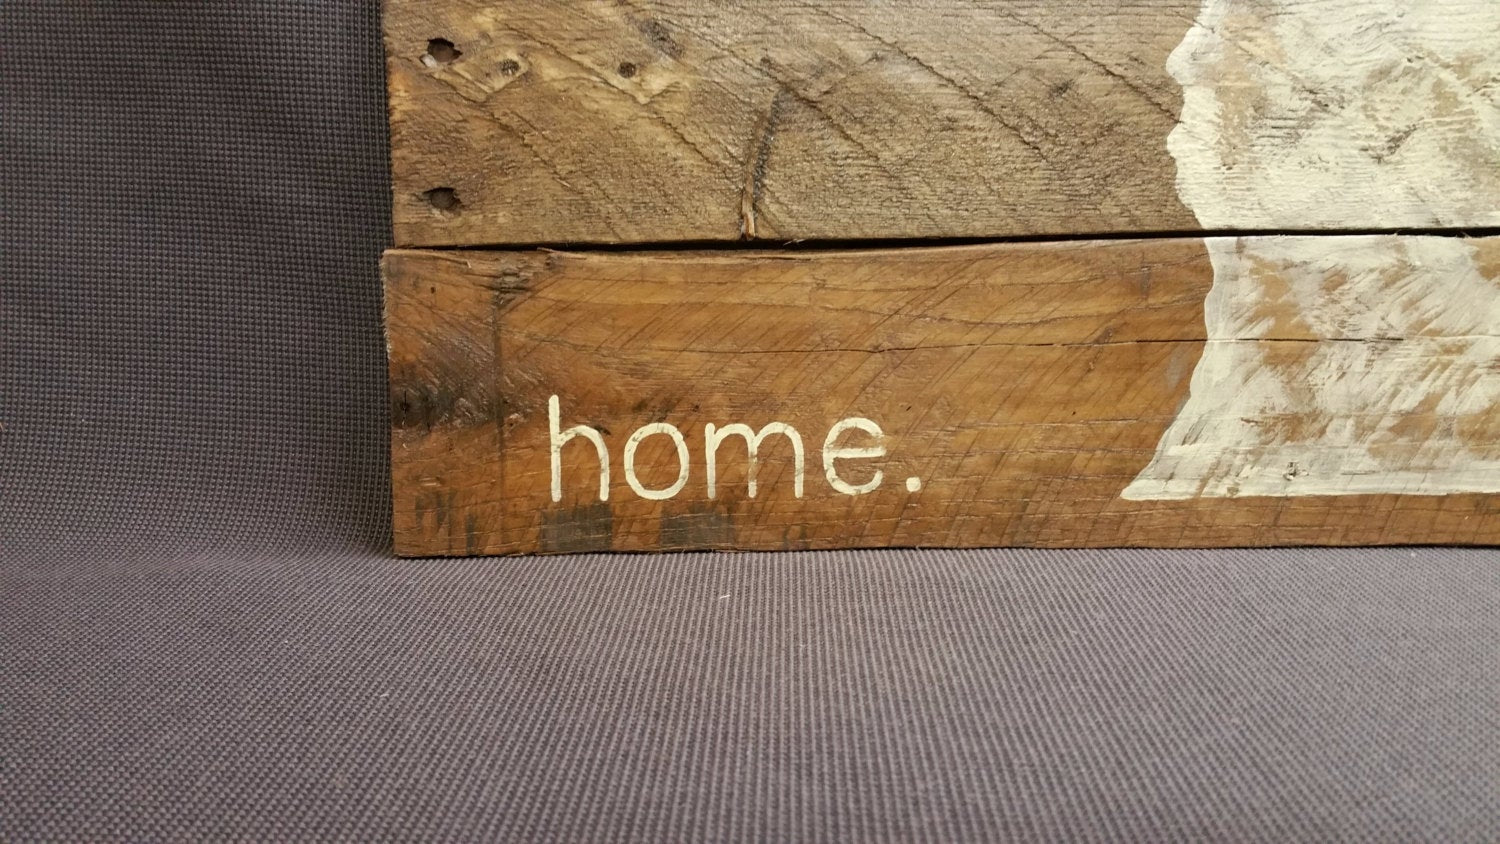 State of Michigan home word sign, Hand painted Pallet Art